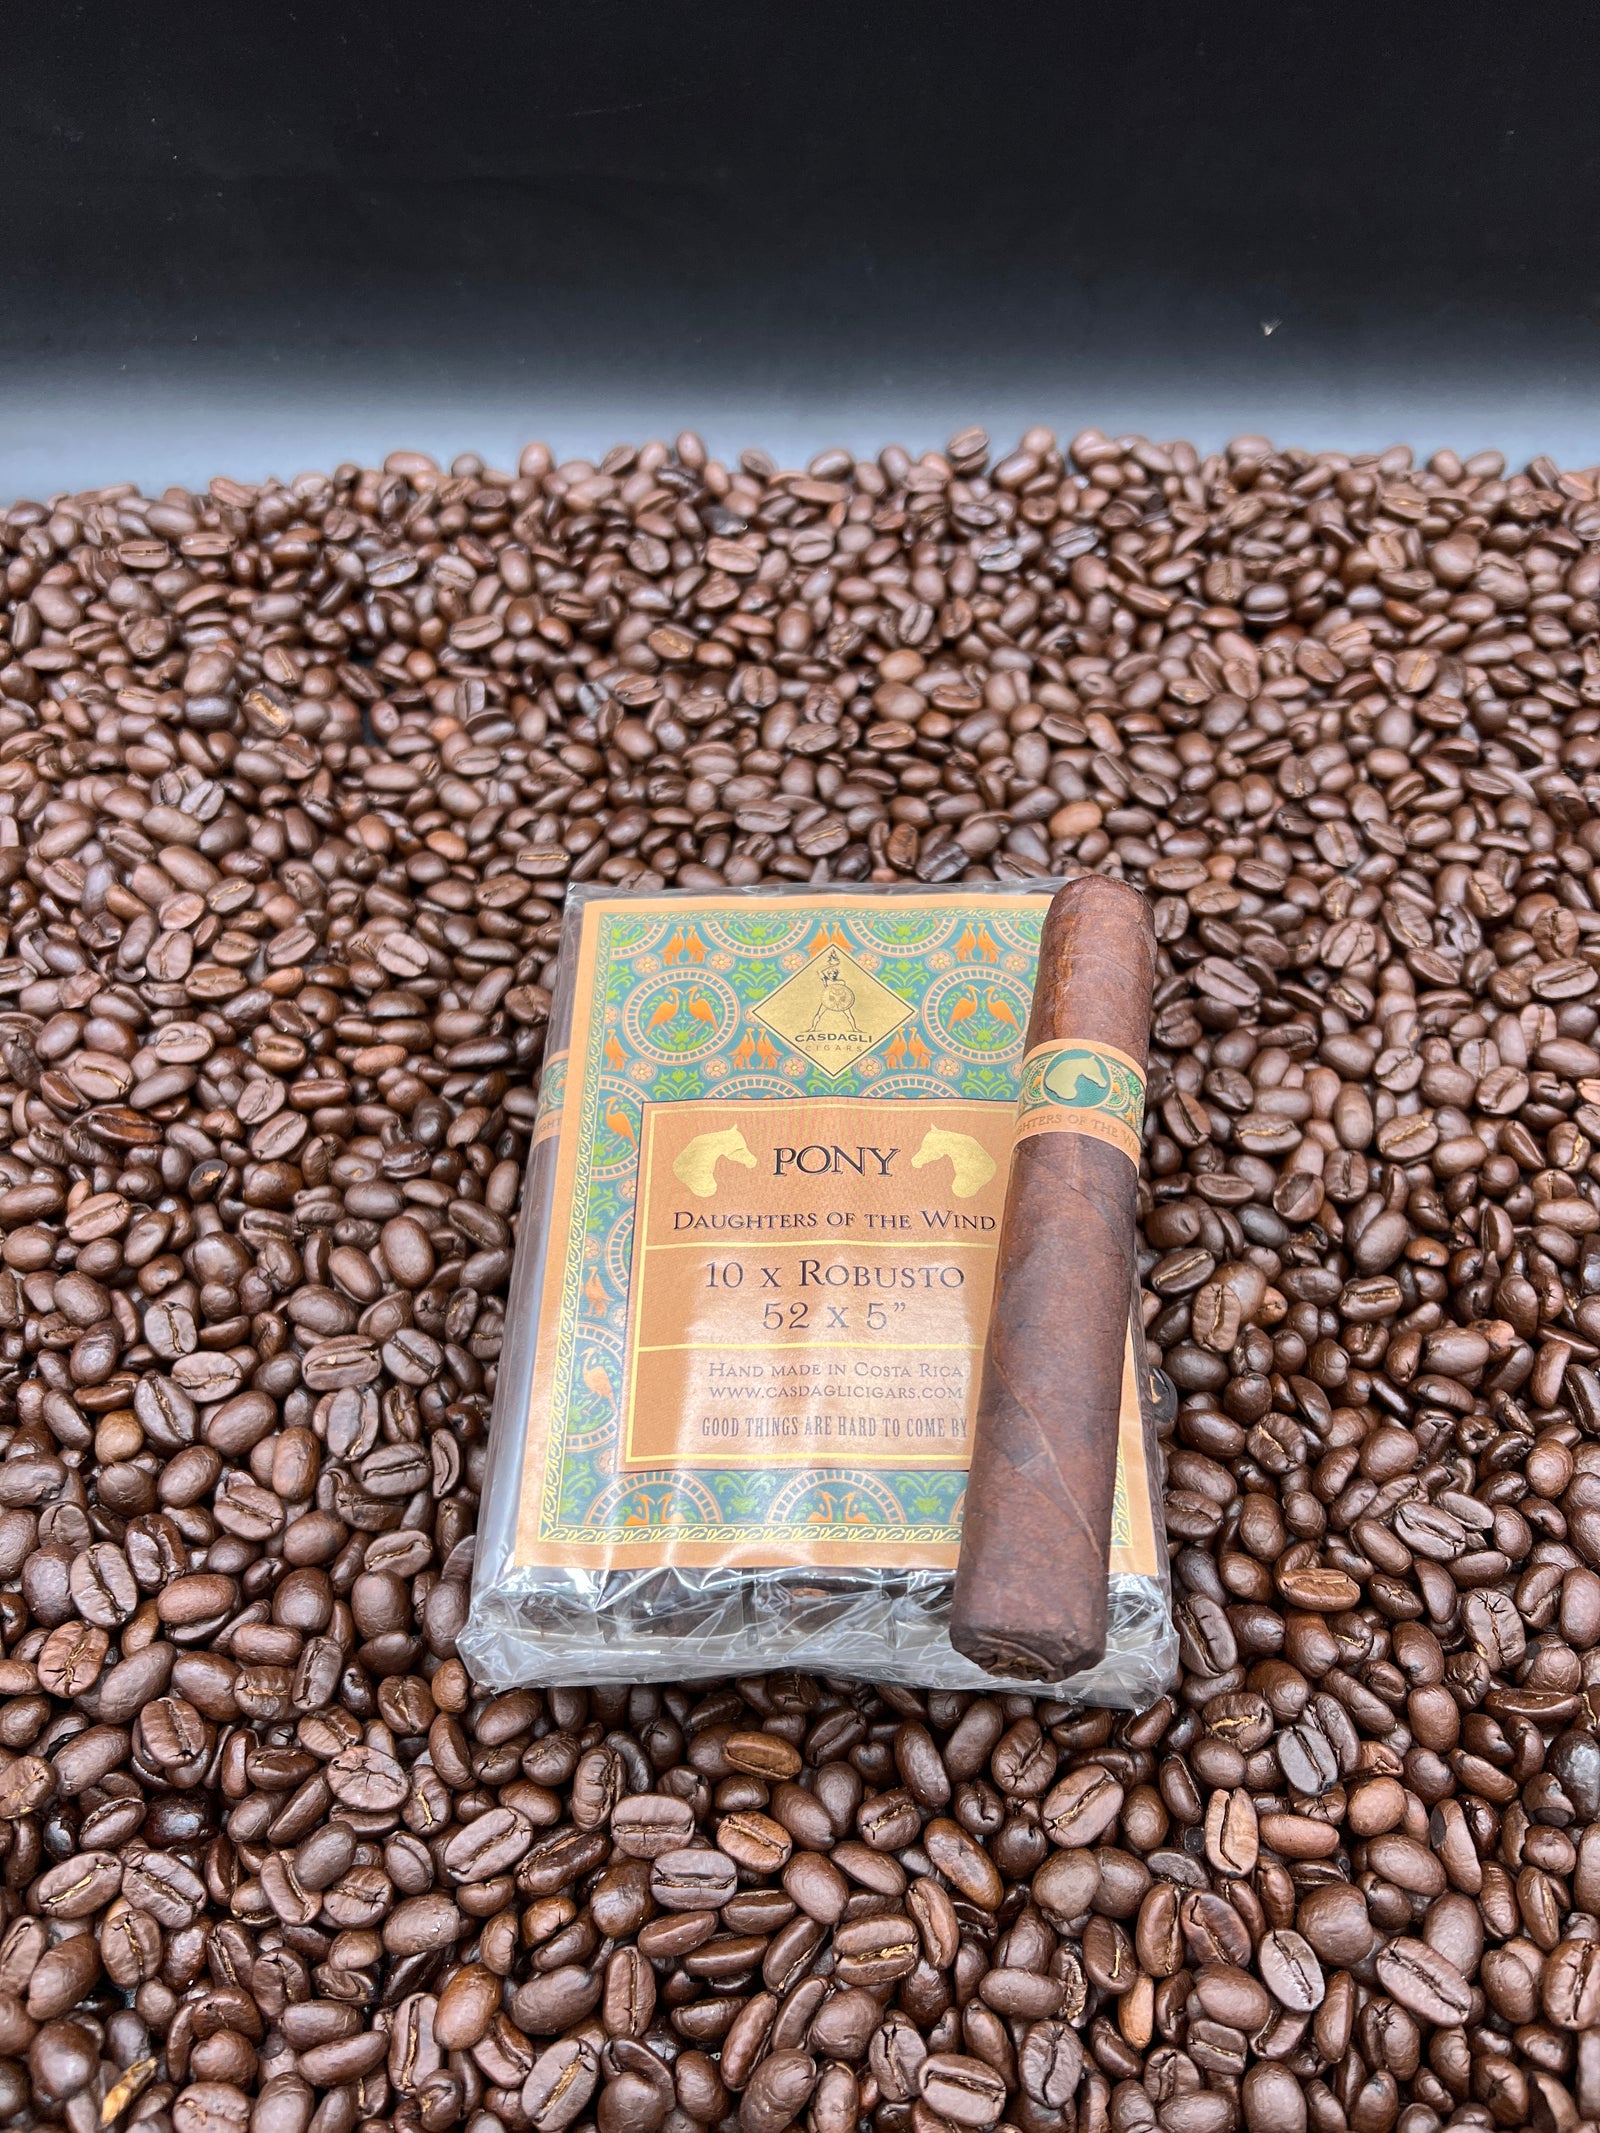 Casdagli - Daughters of the Wind "The Pony" Robusto